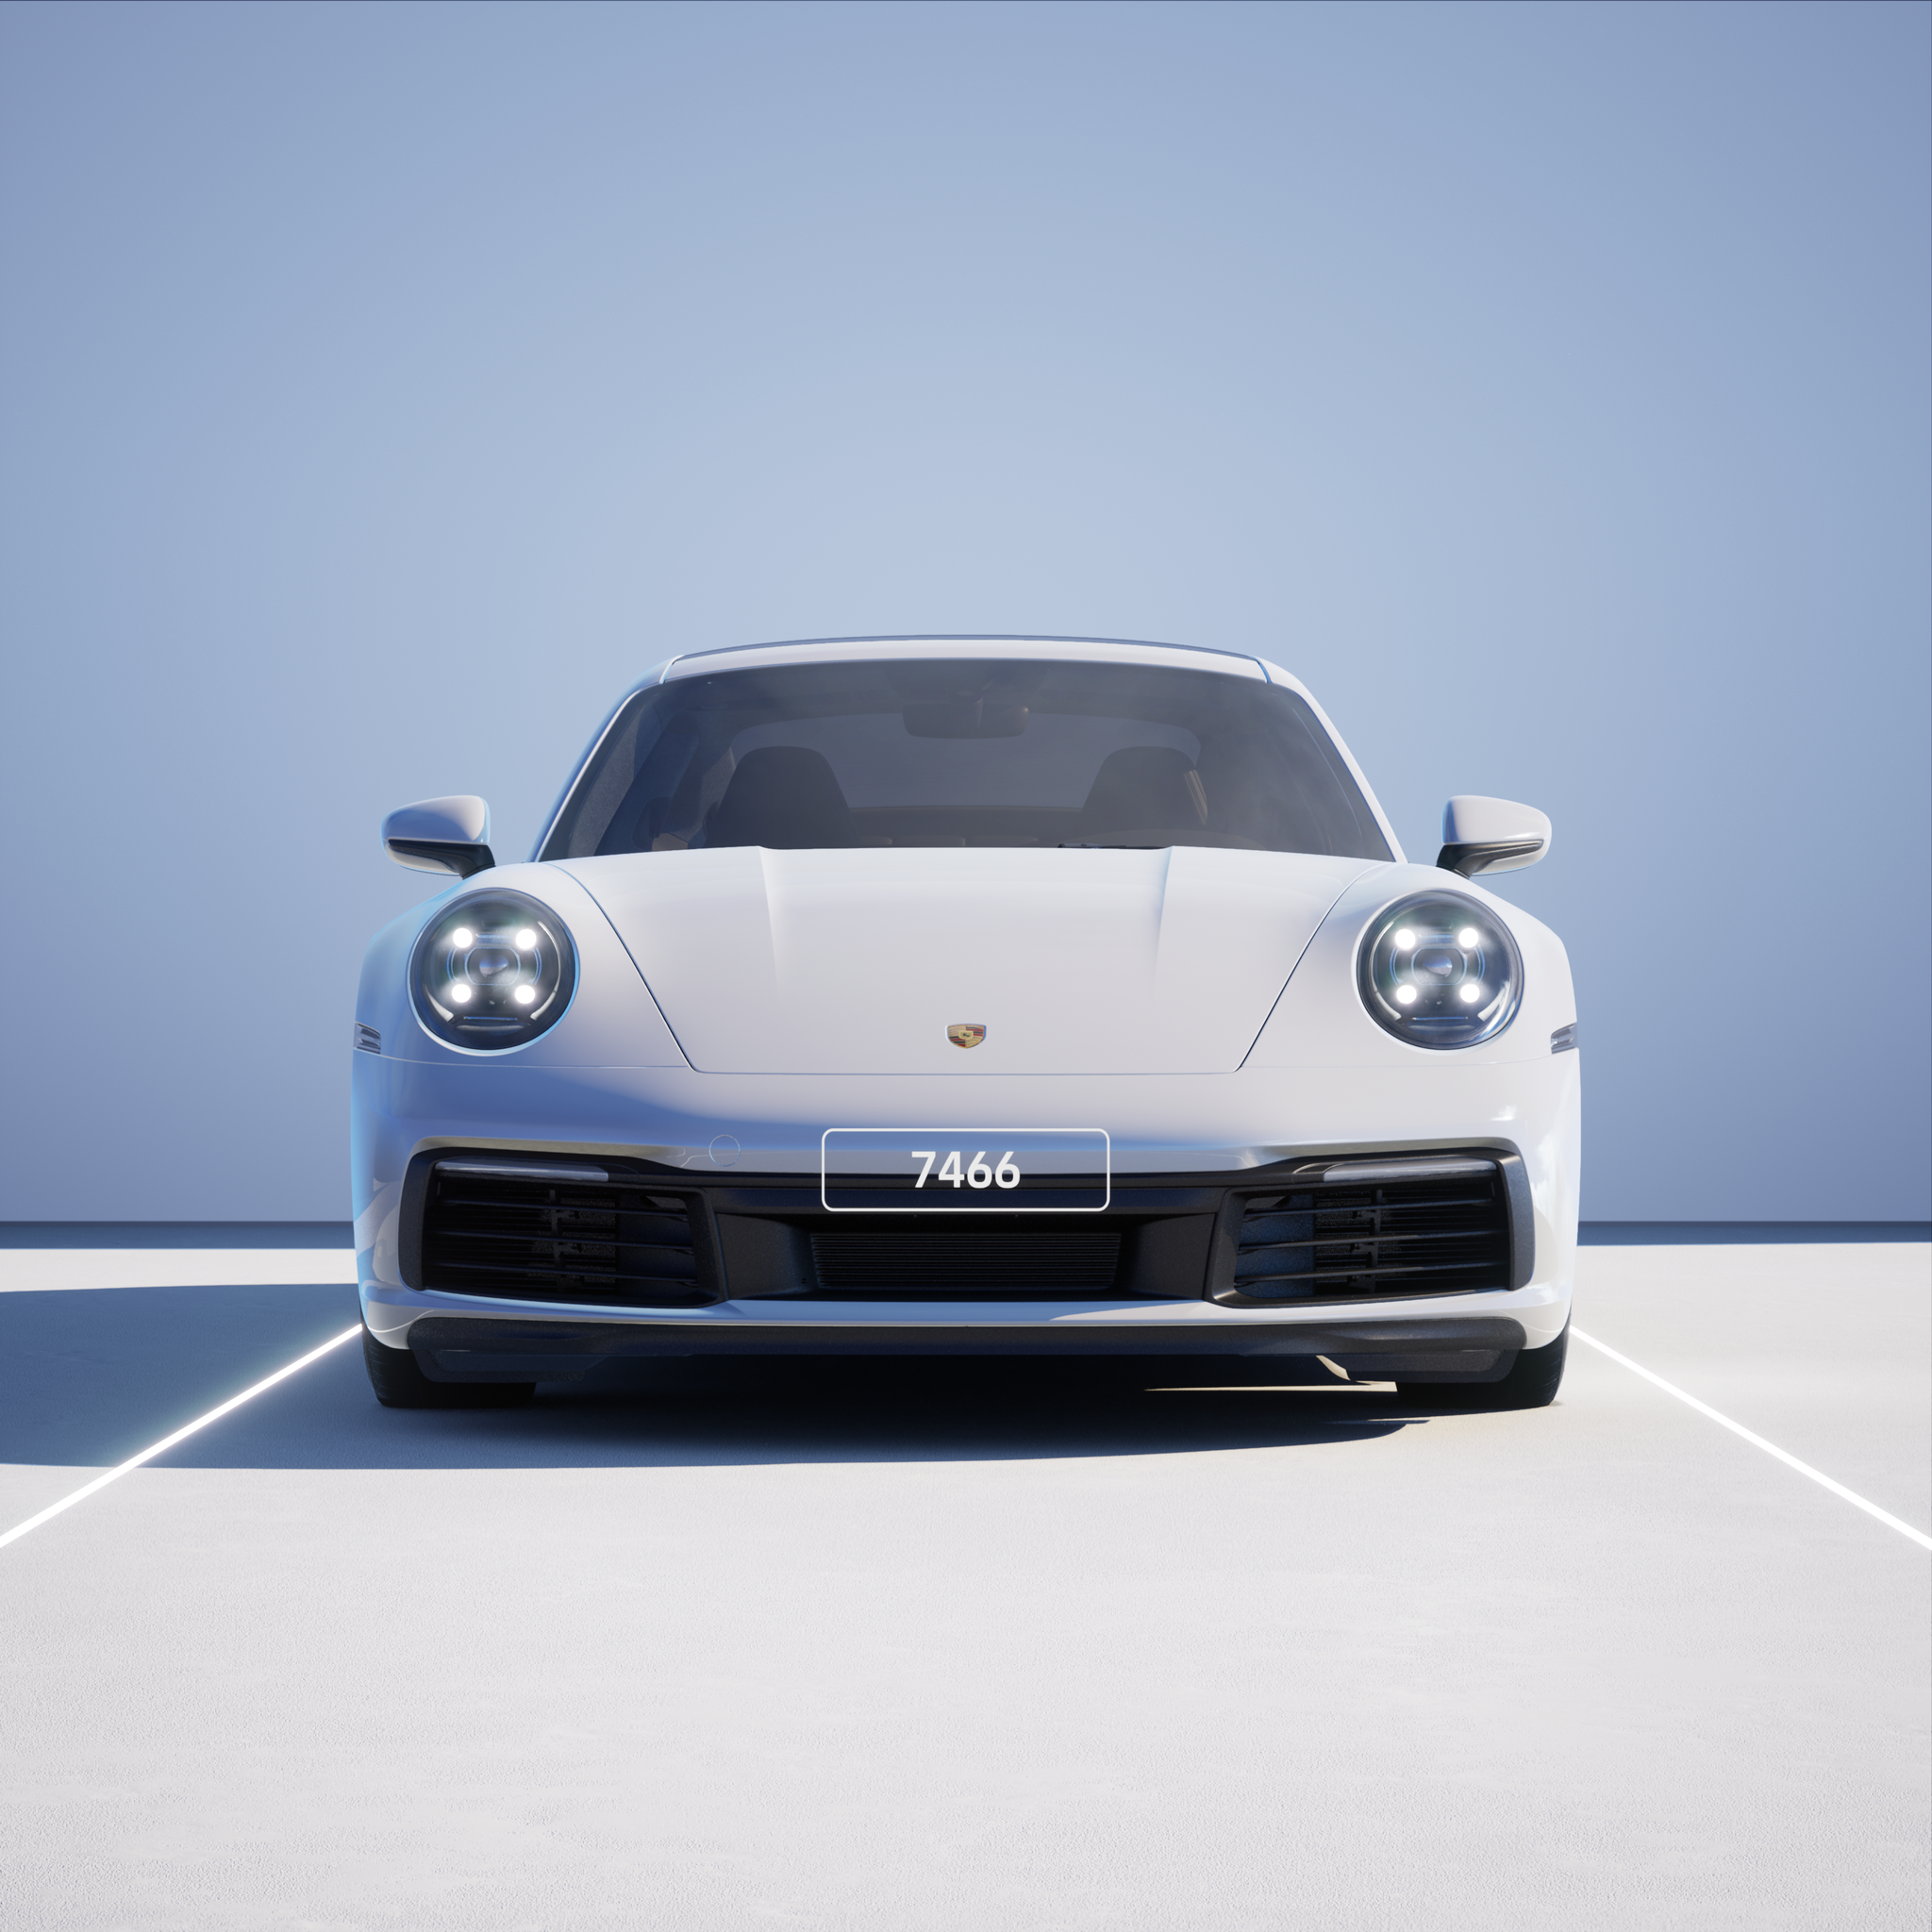 The PORSCHΞ 911 7466 image in phase